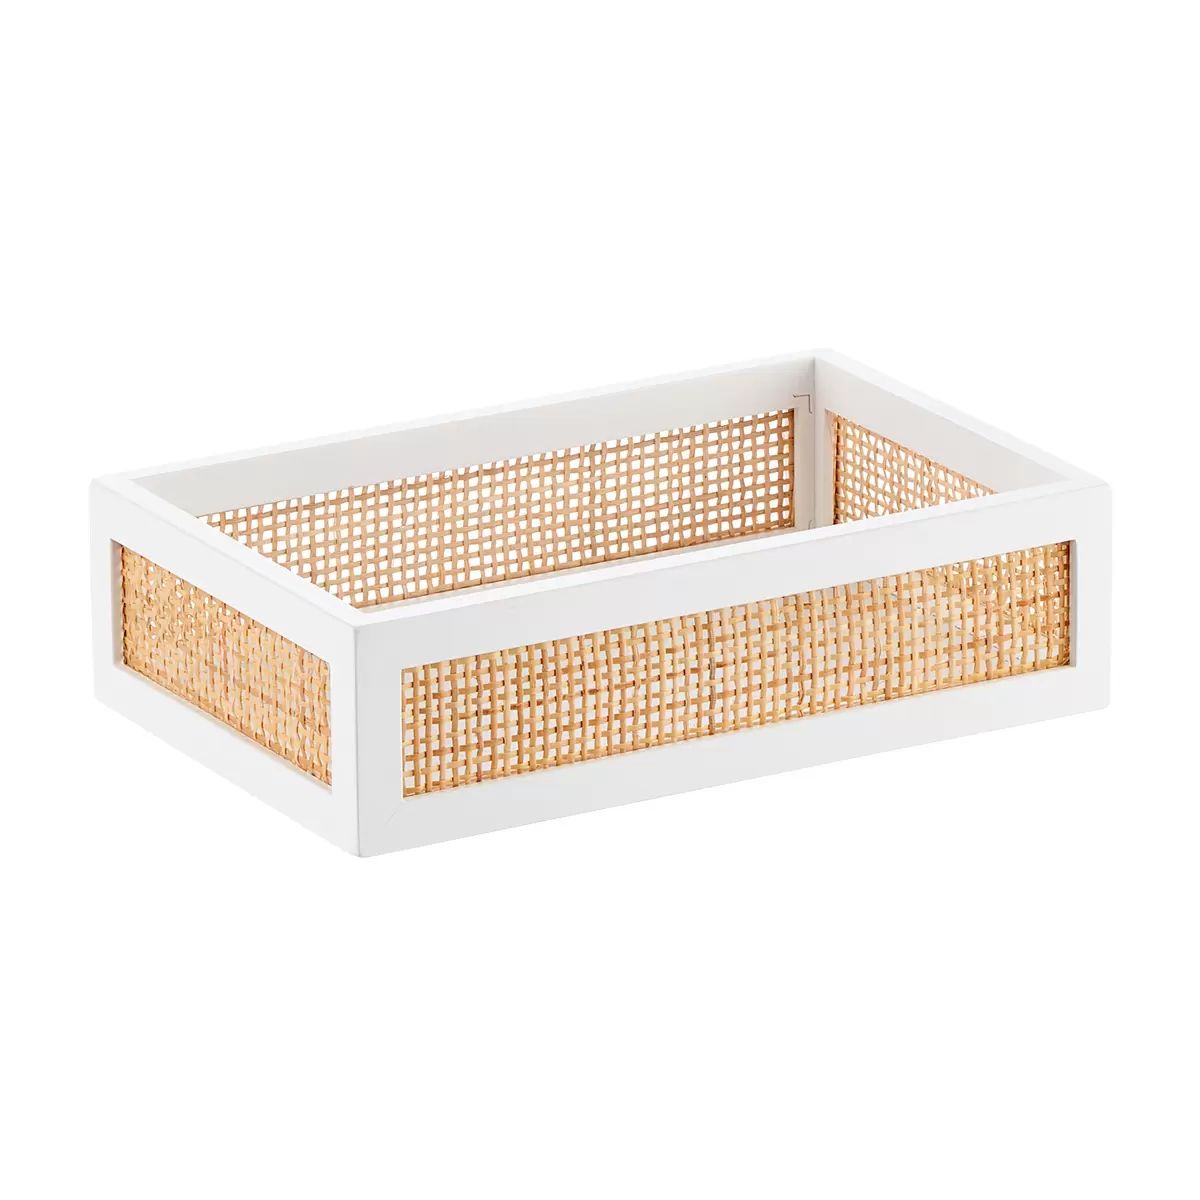 The Container Store Artisan Rattan Cane Small Accessory Tray | The Container Store